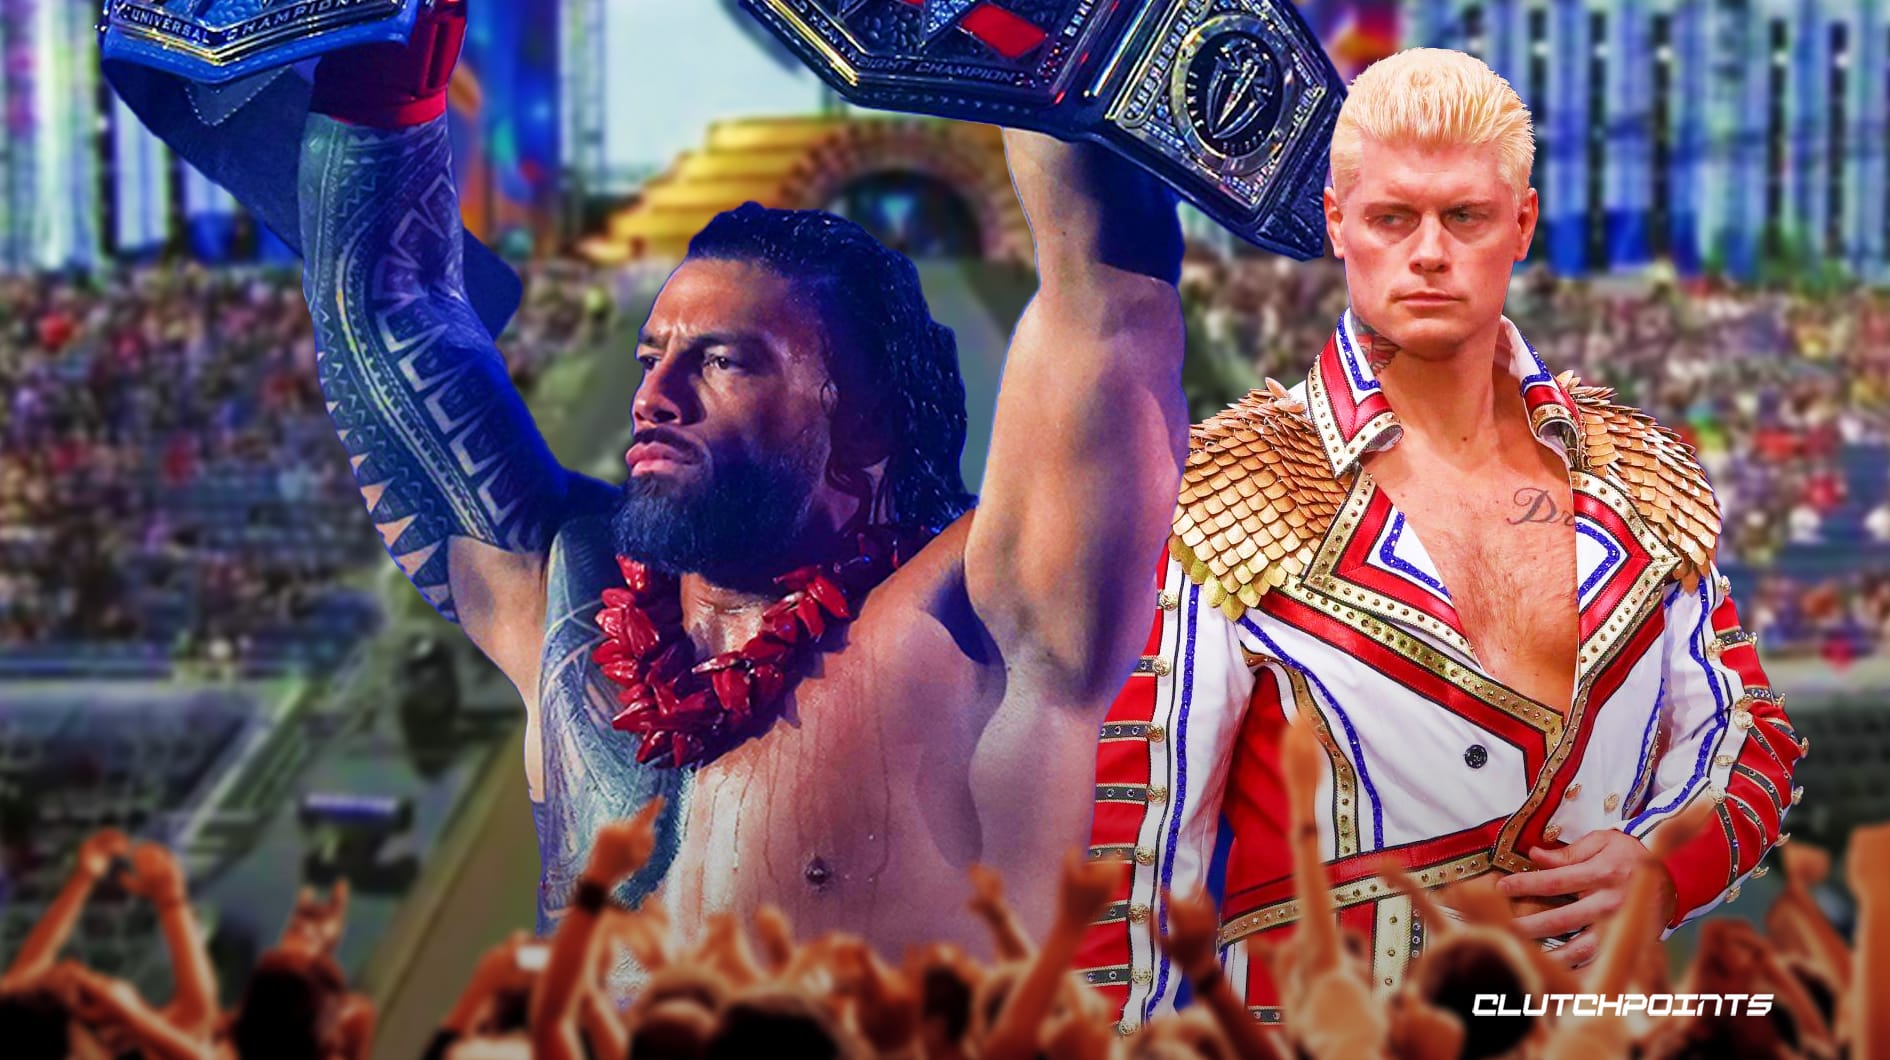 Backstage Notes on Roman Reigns Defeating Cody Rhodes In the WrestleMania 39  Main Event